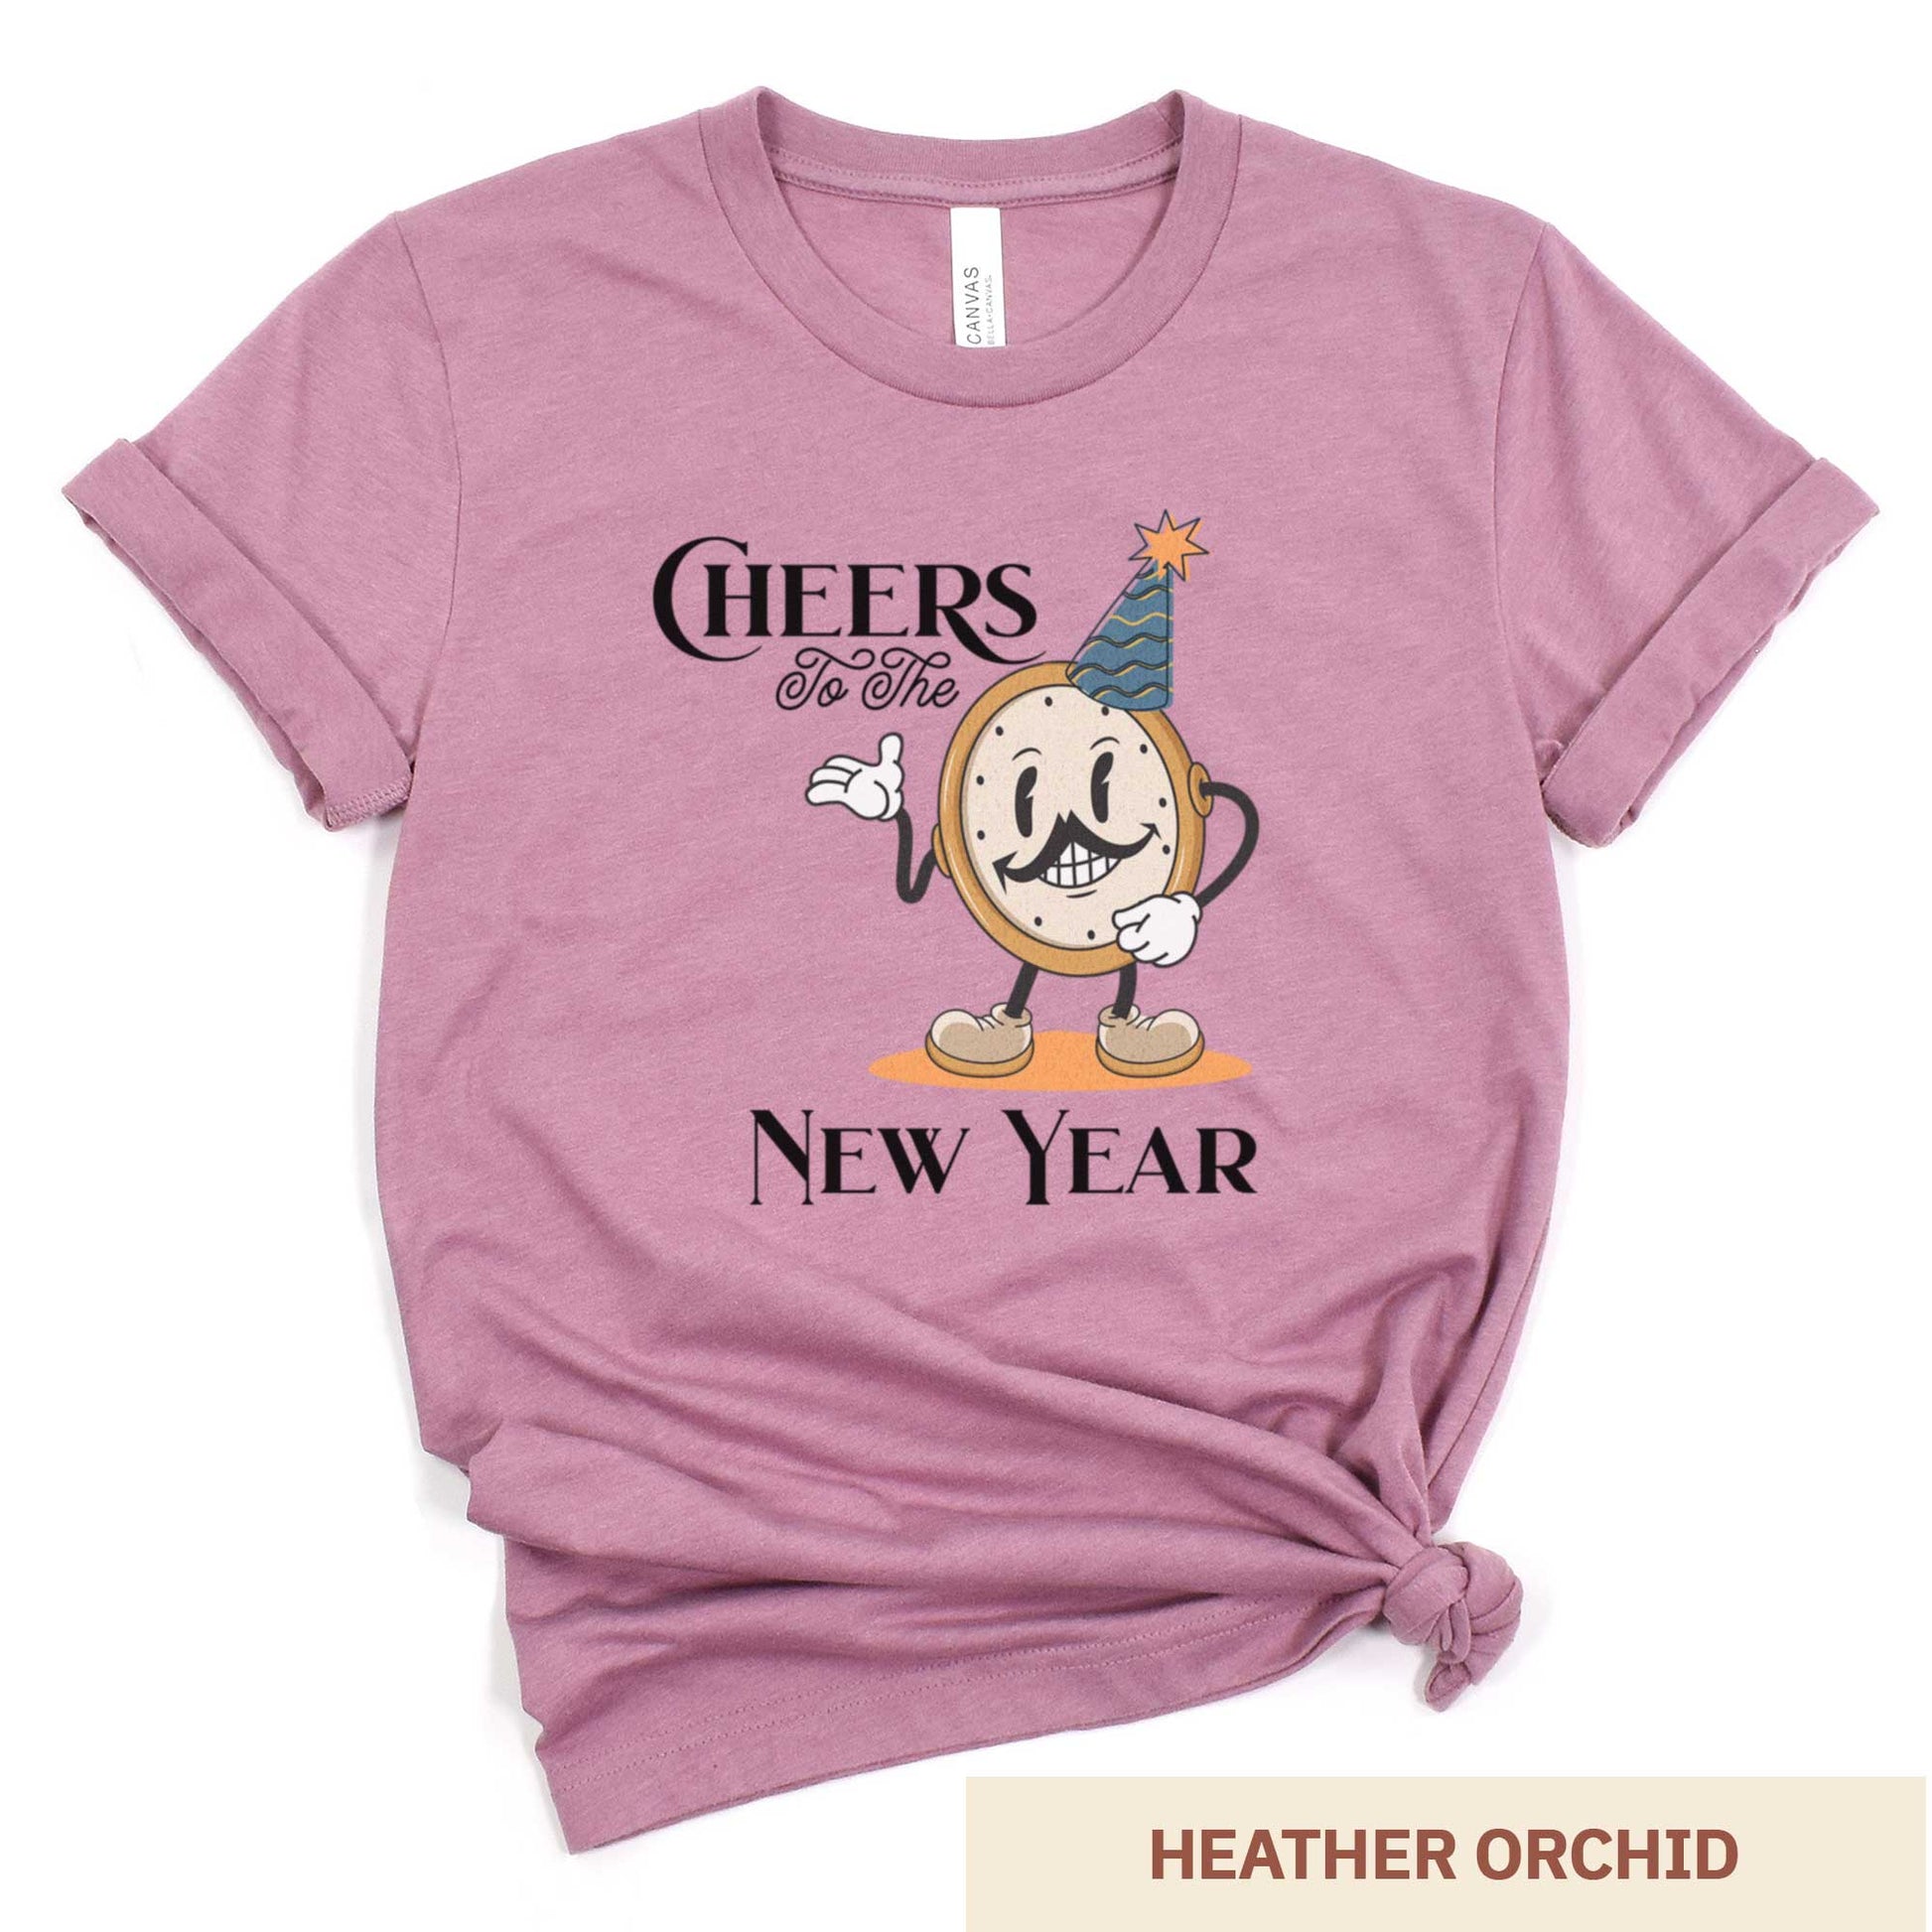 A heather orchid Bella Canvas t-shirt featuring a retro looking clock cartoon with a party hat next to the words Cheers to the New Year.